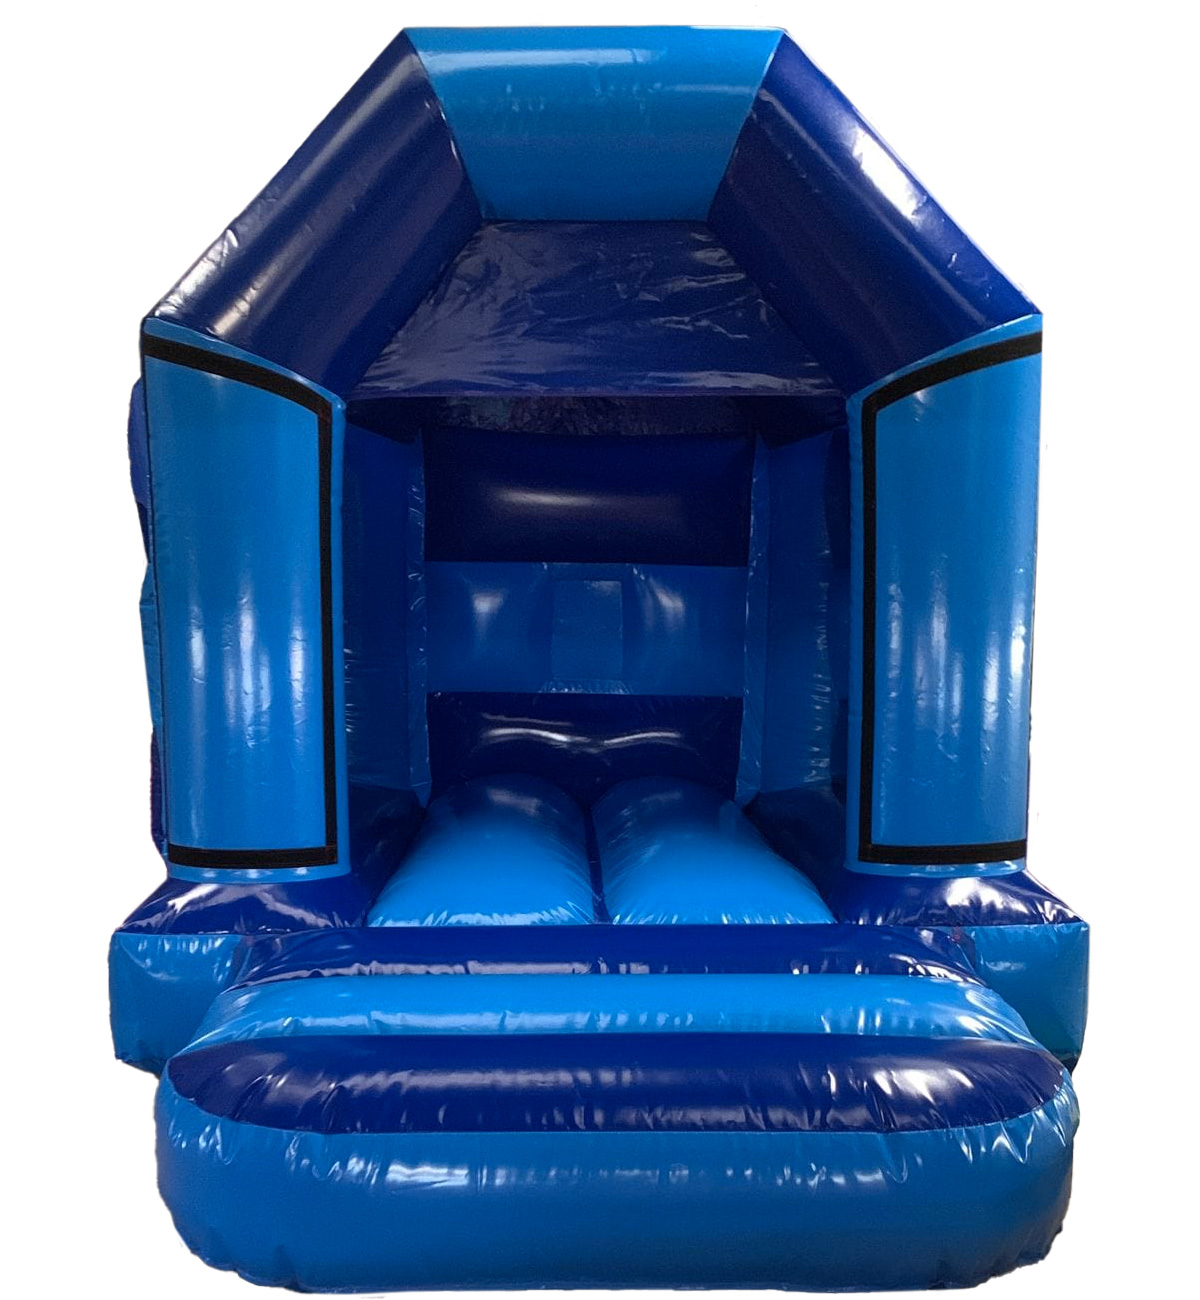 Bouncy Castle Sales - BC704 - Bouncy Inflatable for sale